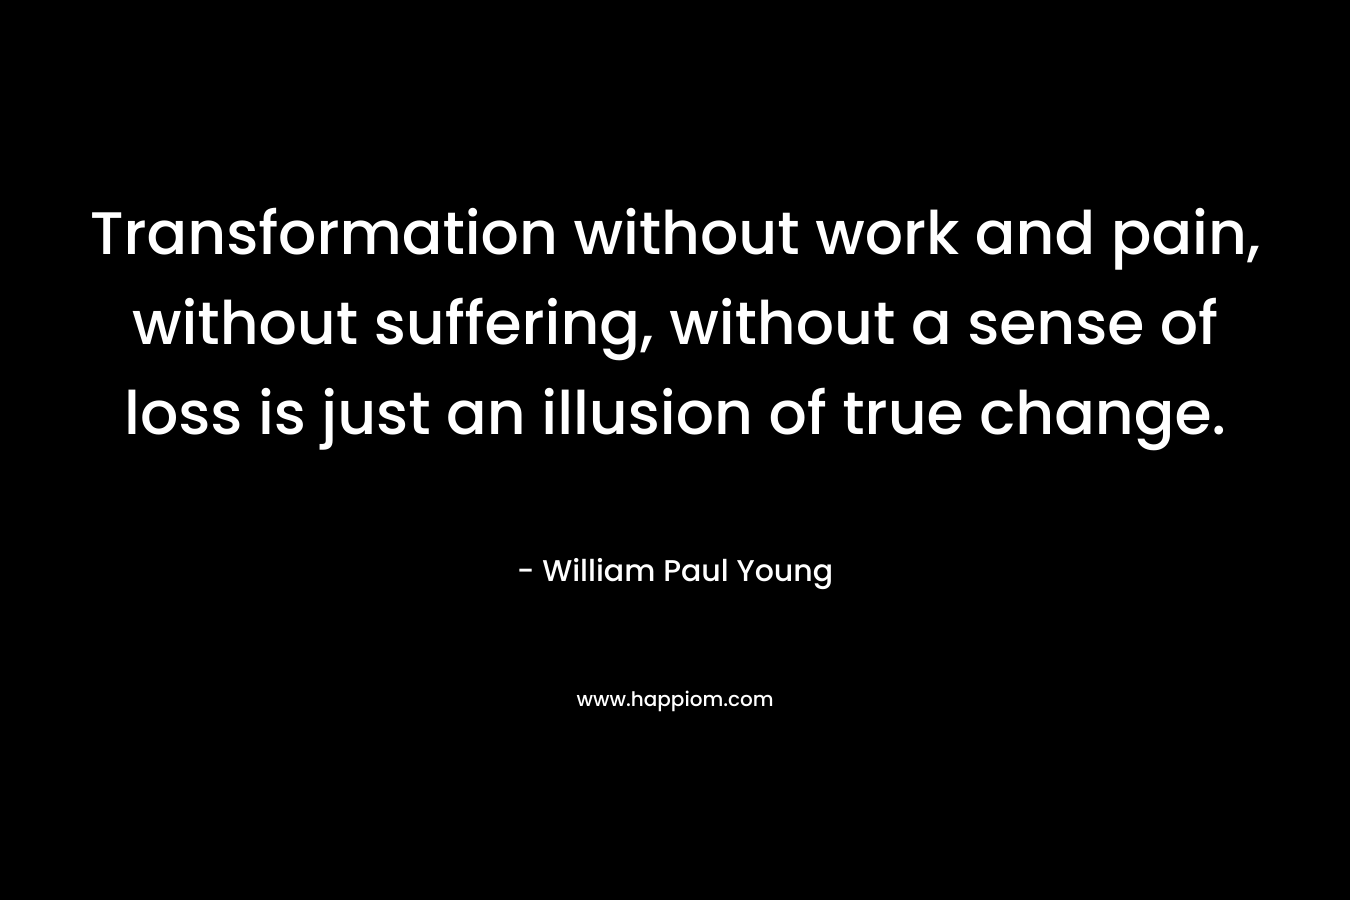 Transformation without work and pain, without suffering, without a sense of loss is just an illusion of true change. – William Paul Young